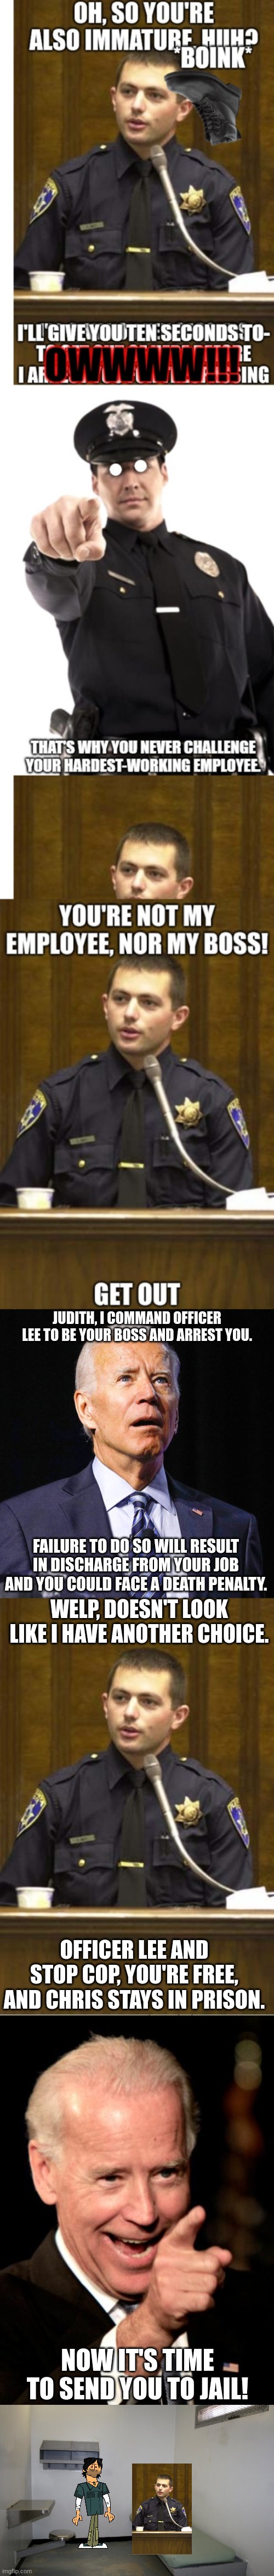 When it comes to the President, you really don't have another choice | JUDITH, I COMMAND OFFICER LEE TO BE YOUR BOSS AND ARREST YOU. FAILURE TO DO SO WILL RESULT IN DISCHARGE FROM YOUR JOB AND YOU COULD FACE A DEATH PENALTY. WELP, DOESN'T LOOK LIKE I HAVE ANOTHER CHOICE. OFFICER LEE AND STOP COP, YOU'RE FREE, AND CHRIS STAYS IN PRISON. NOW IT'S TIME TO SEND YOU TO JAIL! | image tagged in joe biden,memes,police officer testifying,smilin biden,prison cell inside | made w/ Imgflip meme maker